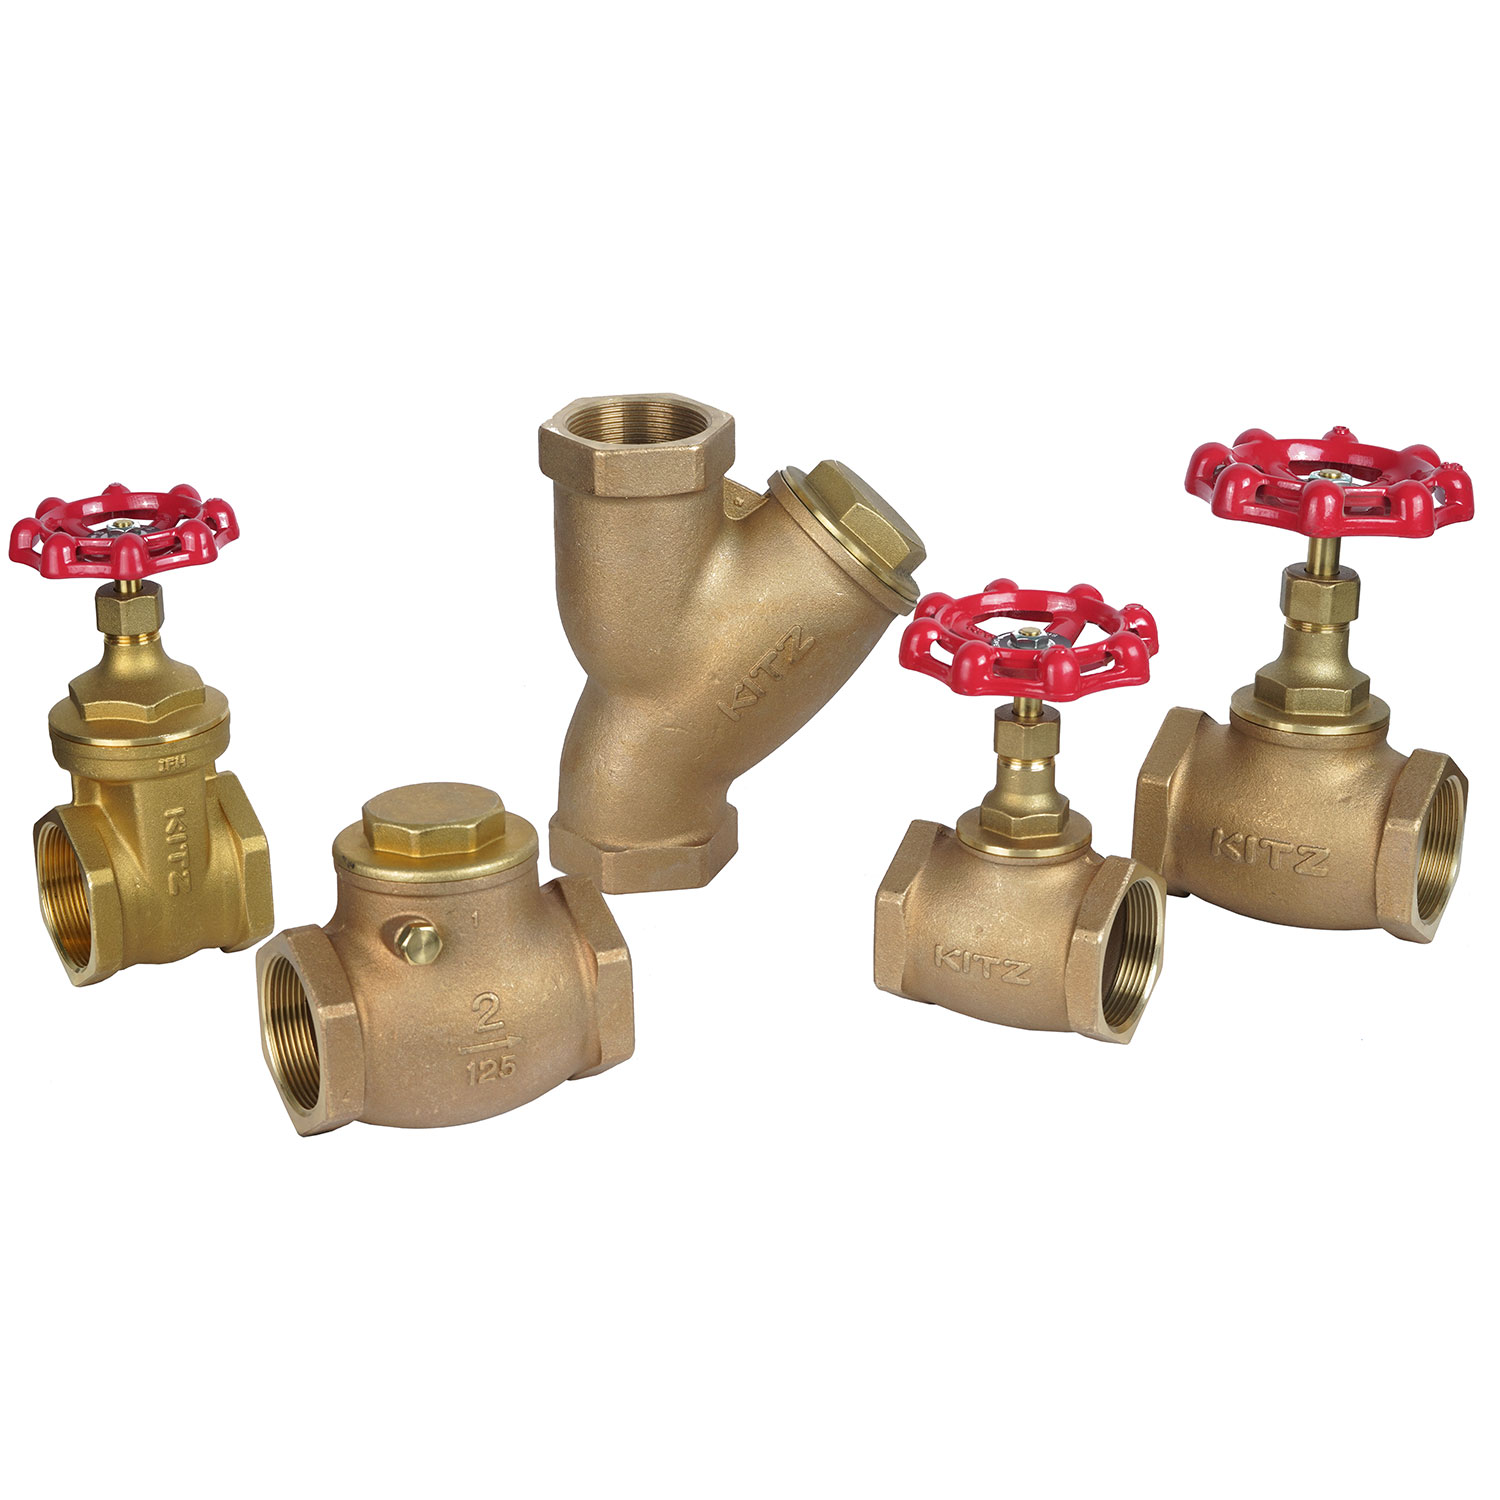 Bronze And Brass Valves With (KITZ) Brand